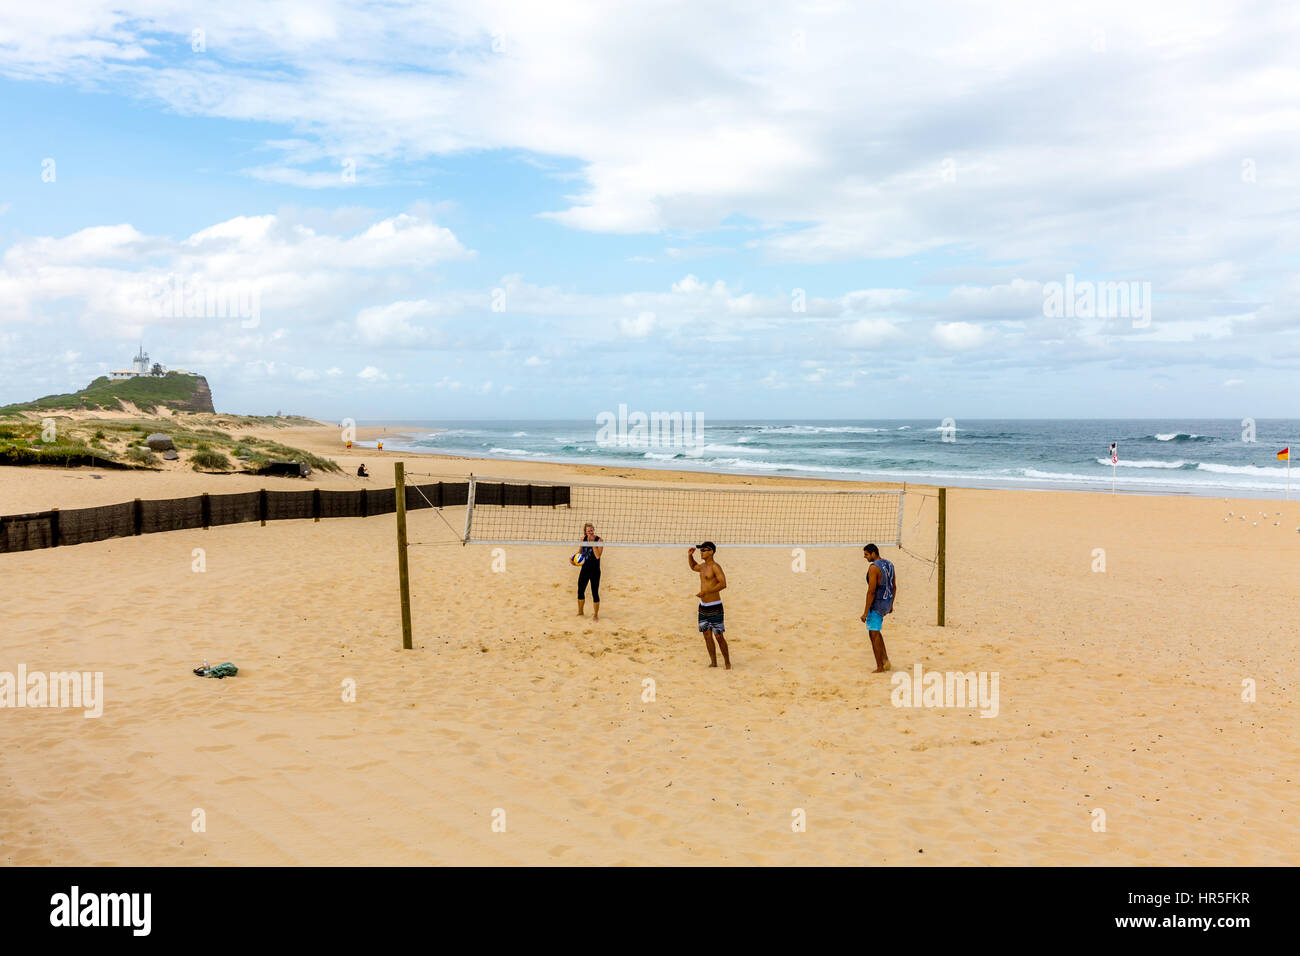 Playing beach volleyball on Nobbys Beach,Newcastle i new south wales,australia Stock Photo